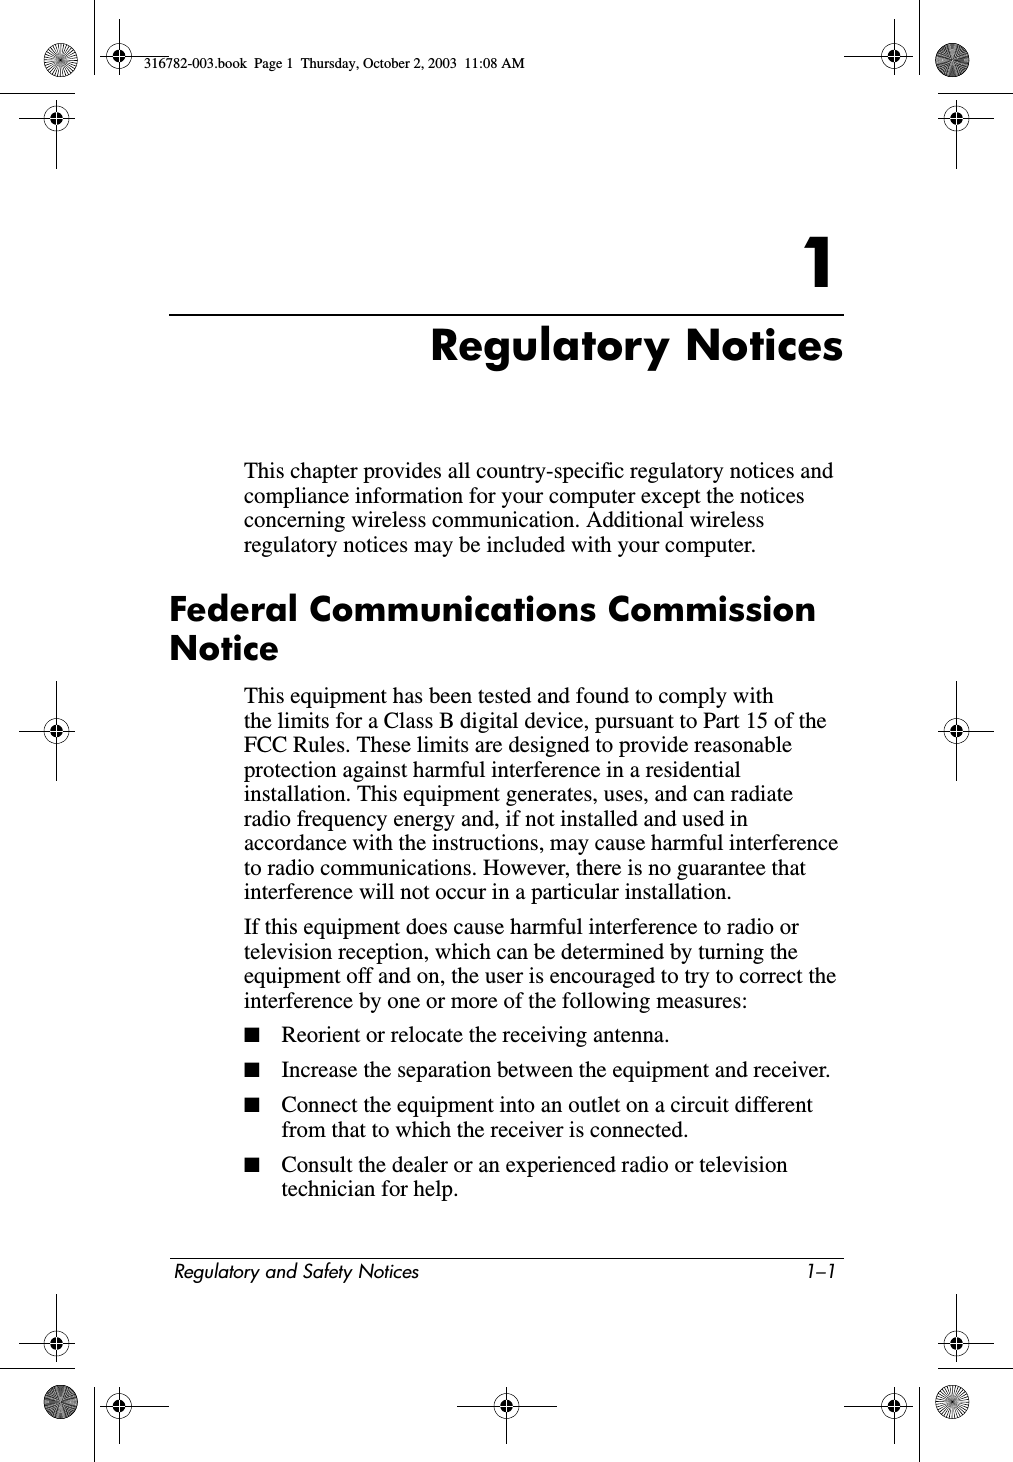 Regulatory and Safety Notices 1–11Regulatory NoticesThis chapter provides all country-specific regulatory notices and compliance information for your computer except the notices concerning wireless communication. Additional wireless regulatory notices may be included with your computer.Federal Communications Commission NoticeThis equipment has been tested and found to comply with the limits for a Class B digital device, pursuant to Part 15 of the FCC Rules. These limits are designed to provide reasonable protection against harmful interference in a residential installation. This equipment generates, uses, and can radiate radio frequency energy and, if not installed and used in accordance with the instructions, may cause harmful interference to radio communications. However, there is no guarantee that interference will not occur in a particular installation.If this equipment does cause harmful interference to radio or television reception, which can be determined by turning the equipment off and on, the user is encouraged to try to correct the interference by one or more of the following measures:■Reorient or relocate the receiving antenna.■Increase the separation between the equipment and receiver.■Connect the equipment into an outlet on a circuit different from that to which the receiver is connected.■Consult the dealer or an experienced radio or television technician for help.316782-003.book  Page 1  Thursday, October 2, 2003  11:08 AM